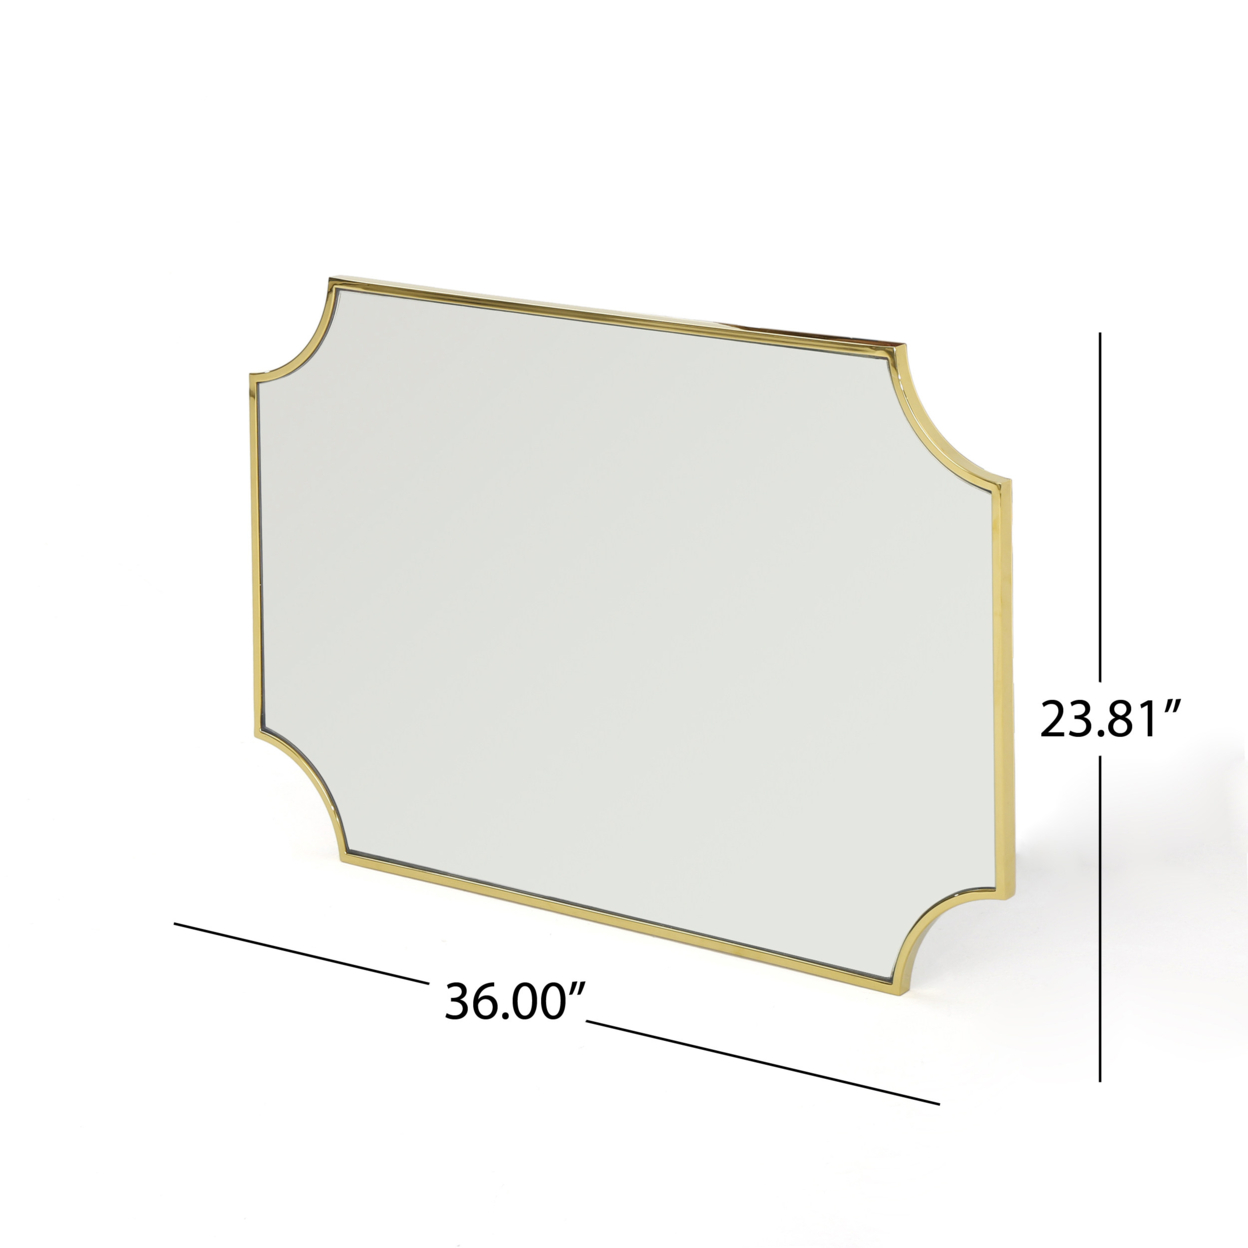 Estelle Glam Wall Mirror With Gold Finished Stainless Steel Frame